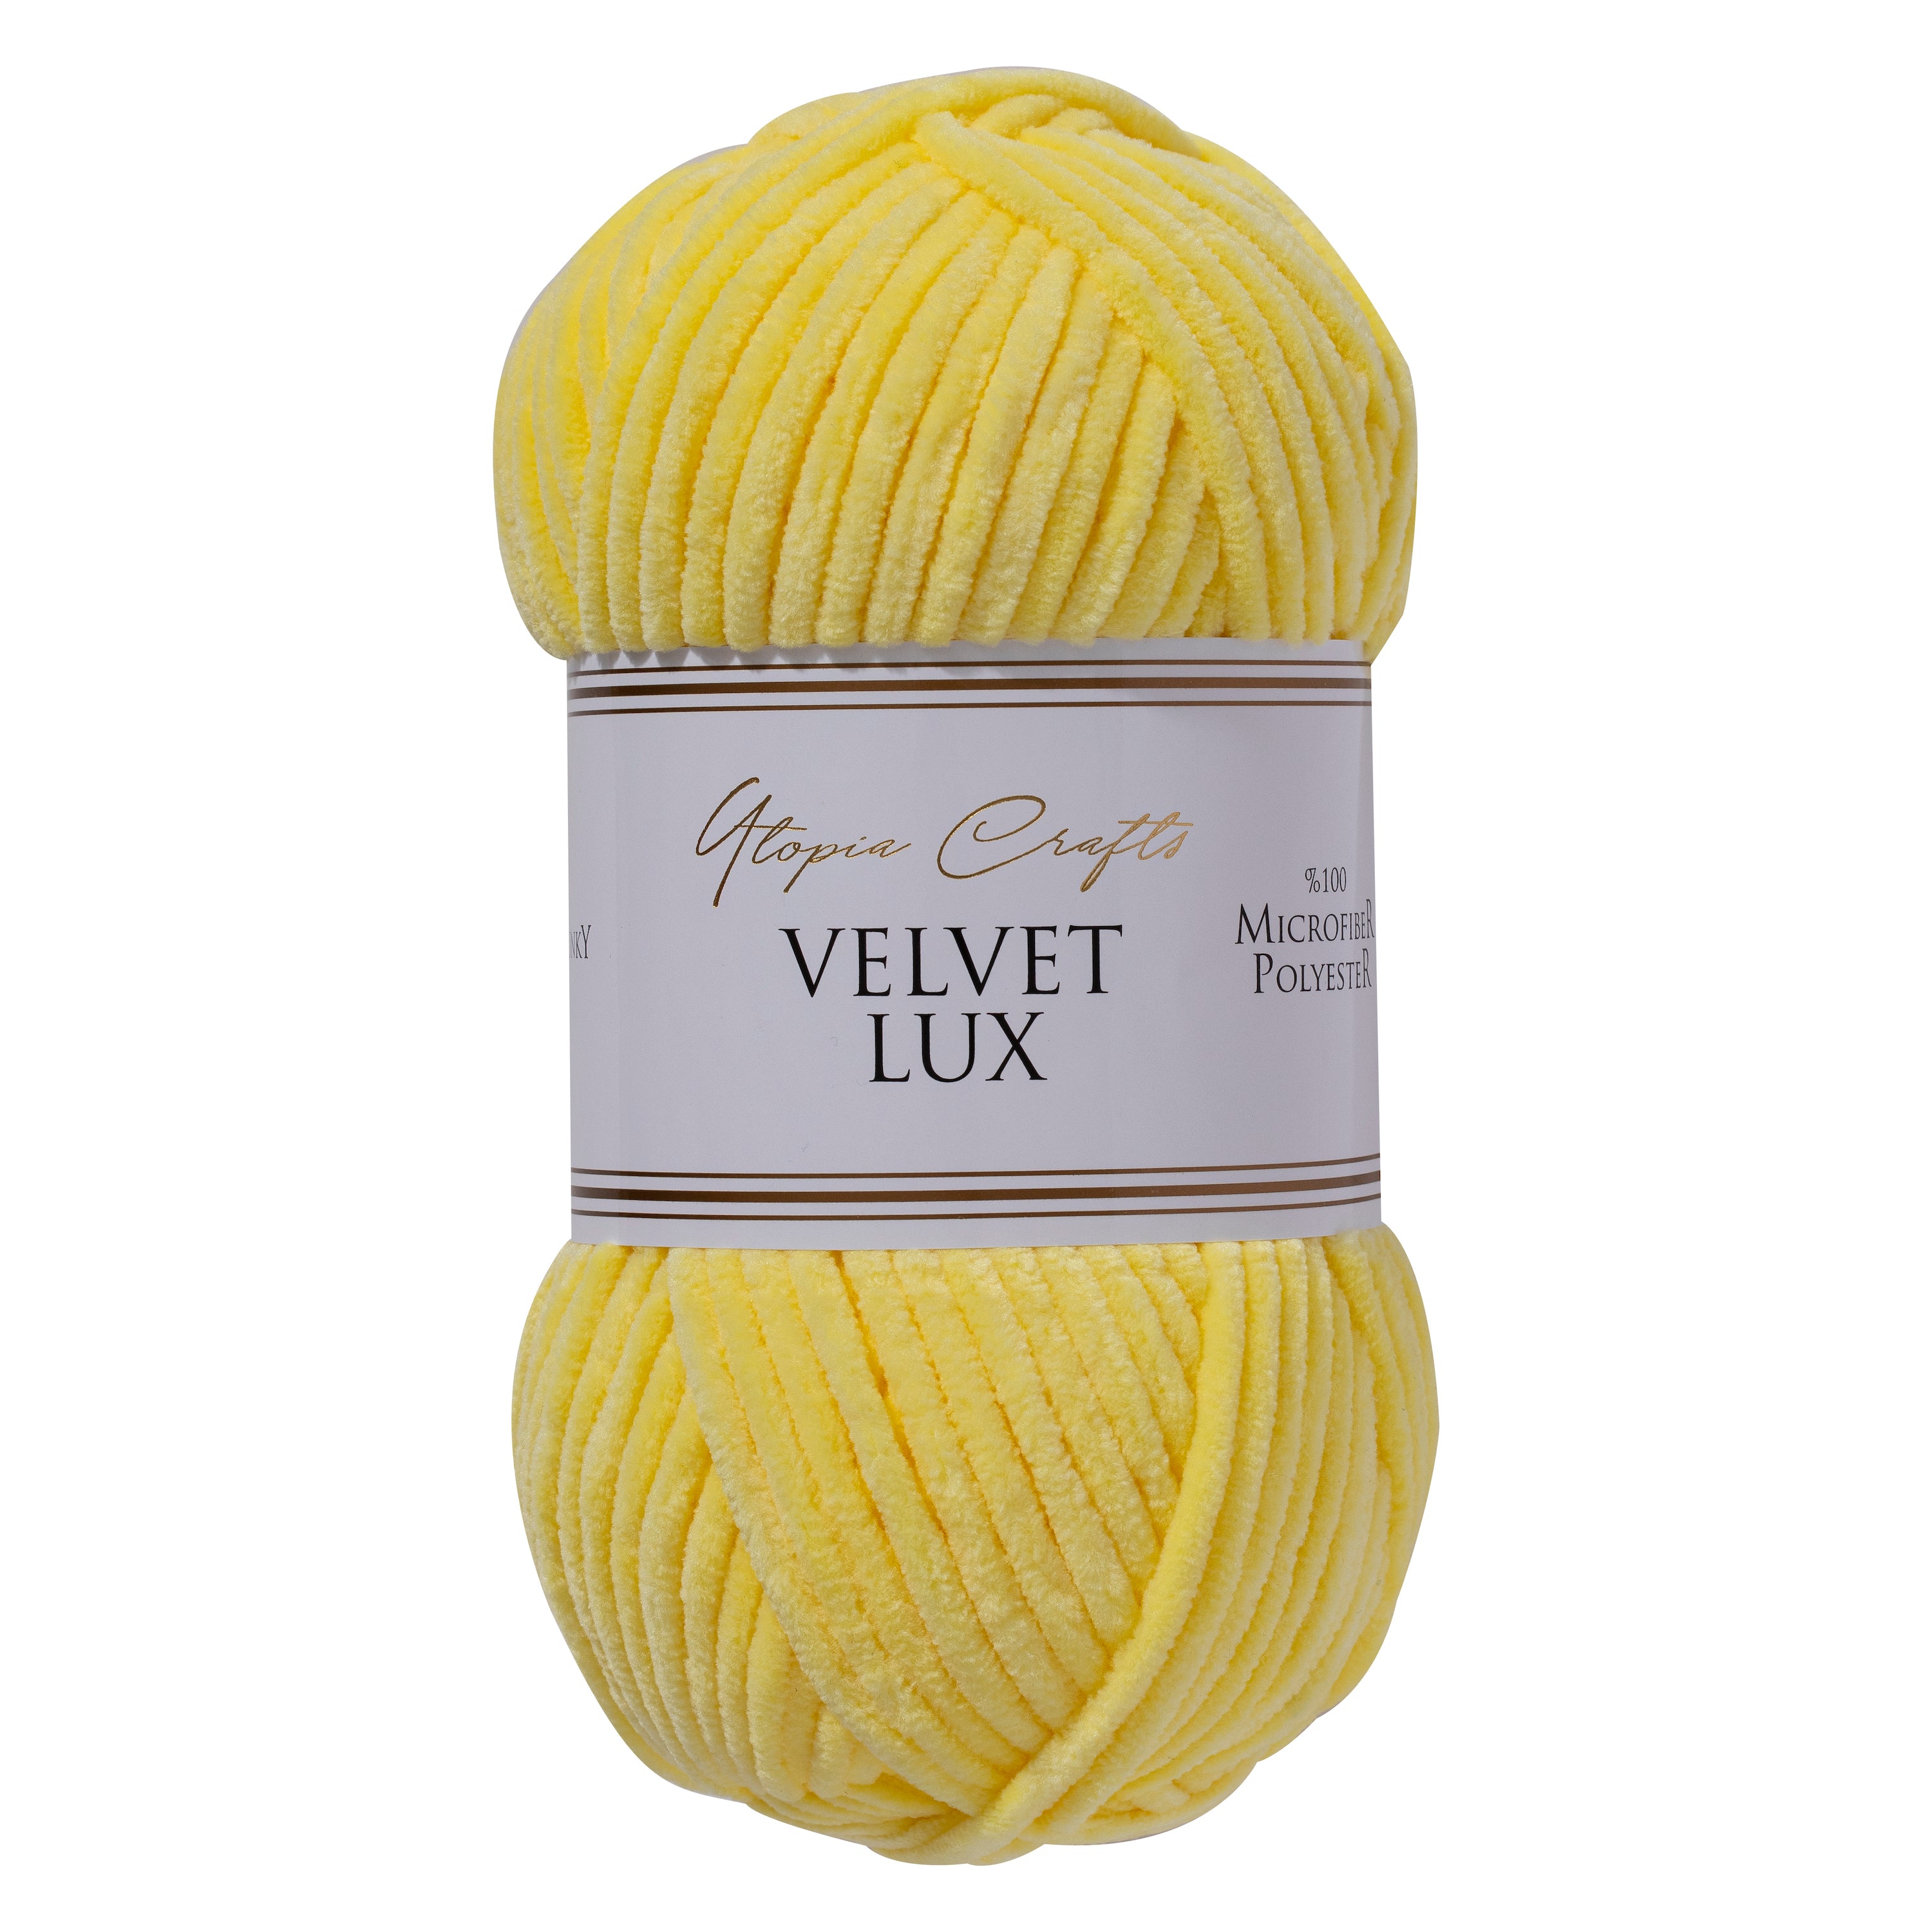 Utopia Crafts Velvet Lux Chenille Super Soft Chunky Yarn for Knitting and Crochet, 100g - 110m (Sun Yellow)